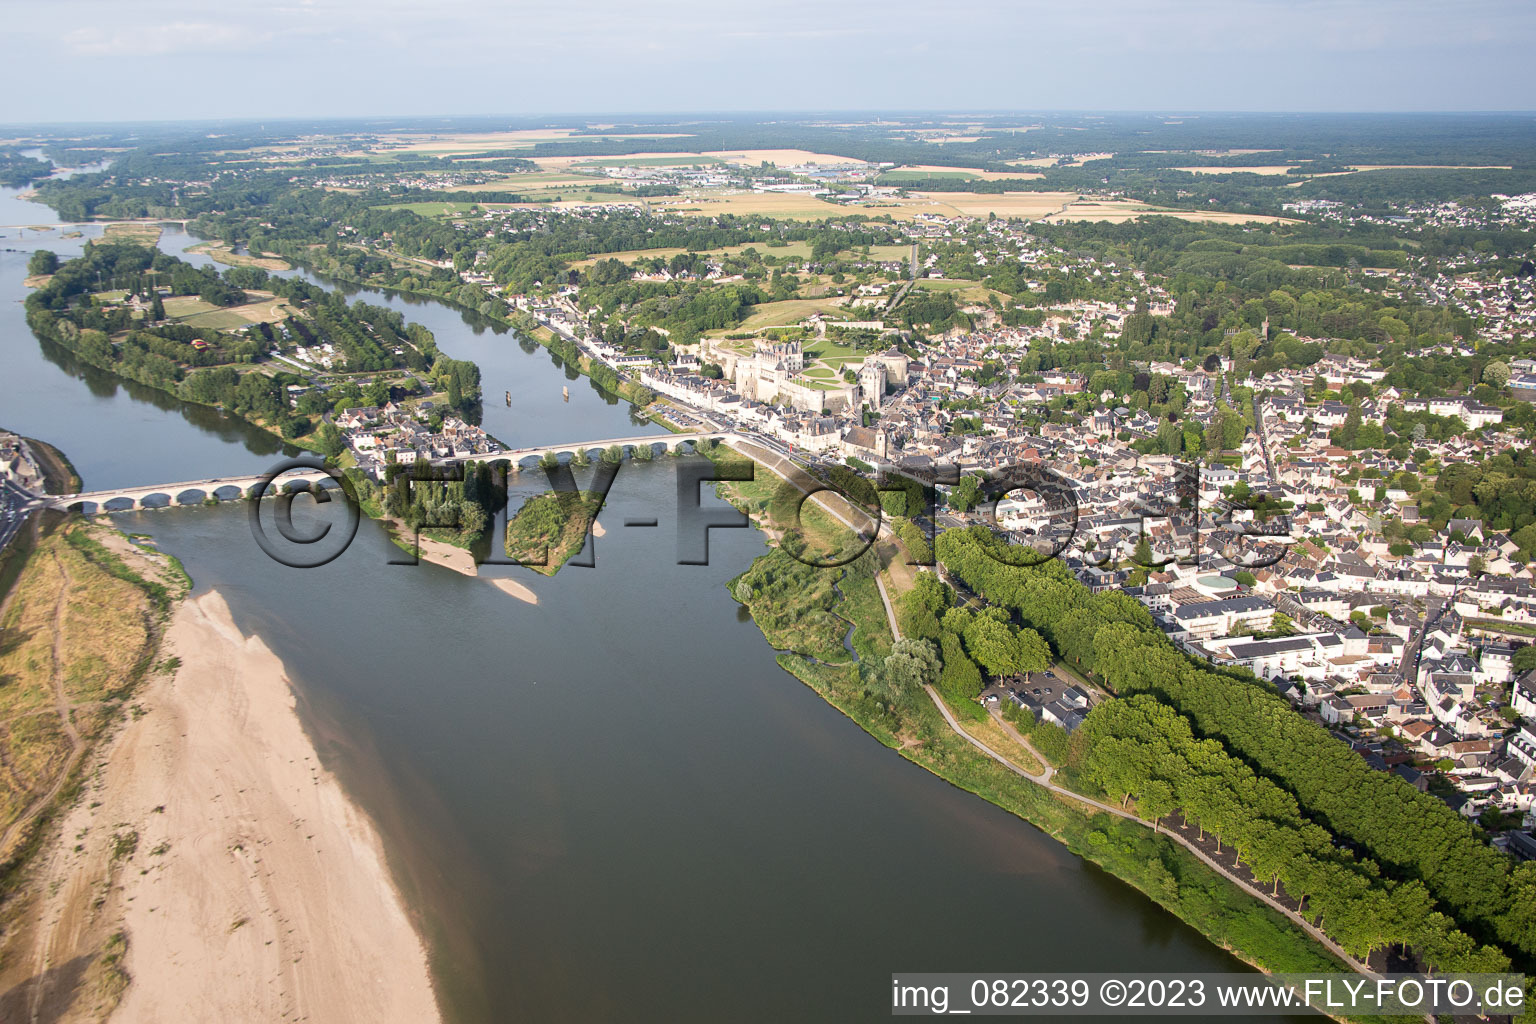 Amboise in the state Indre et Loire, France viewn from the air